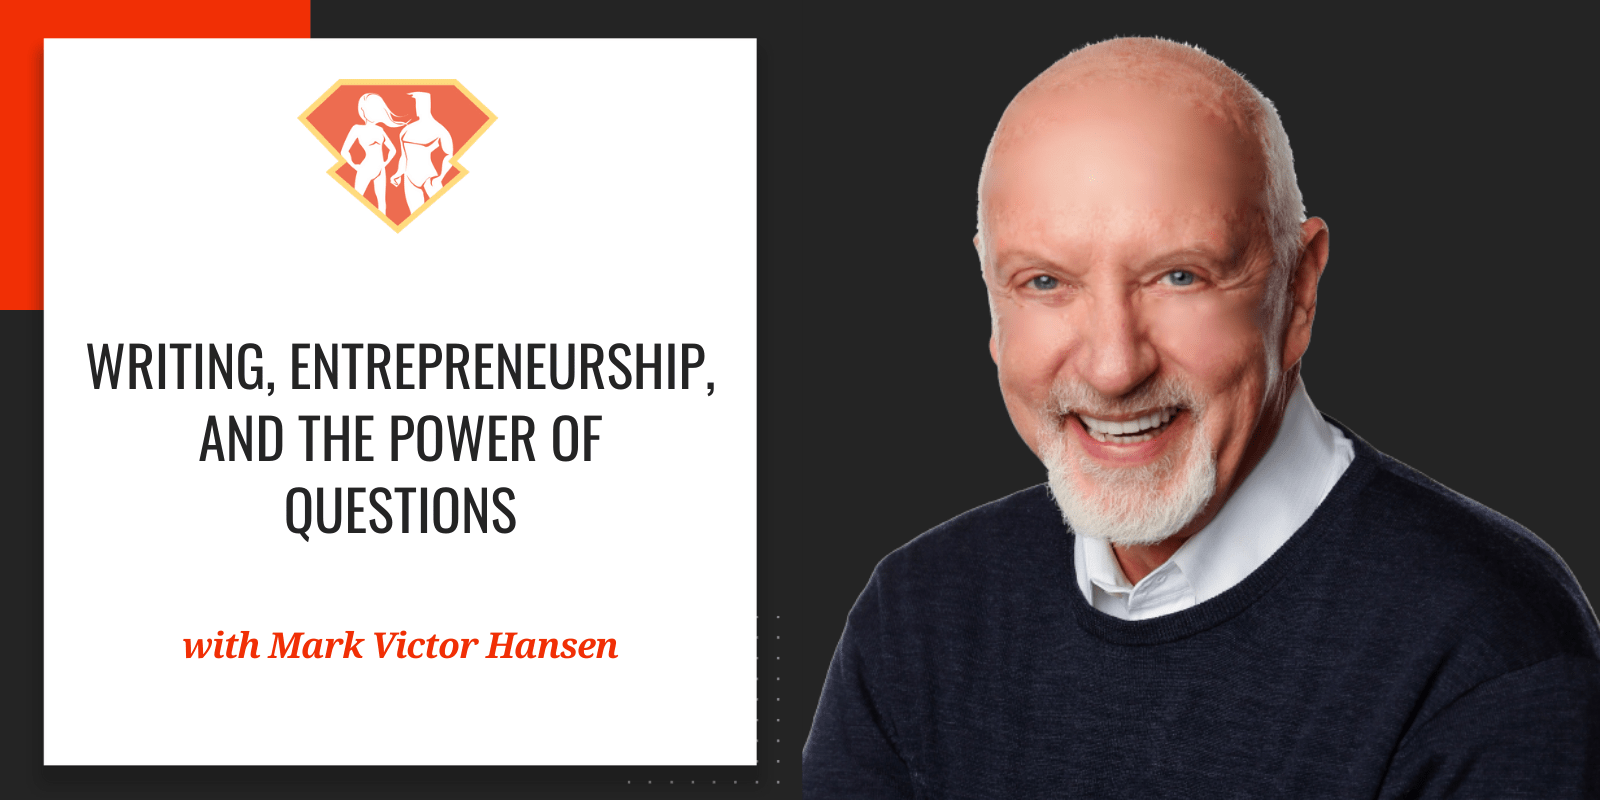 Mark Victor Hansen On Writing, Entrepreneurship, And The Power Of Questions